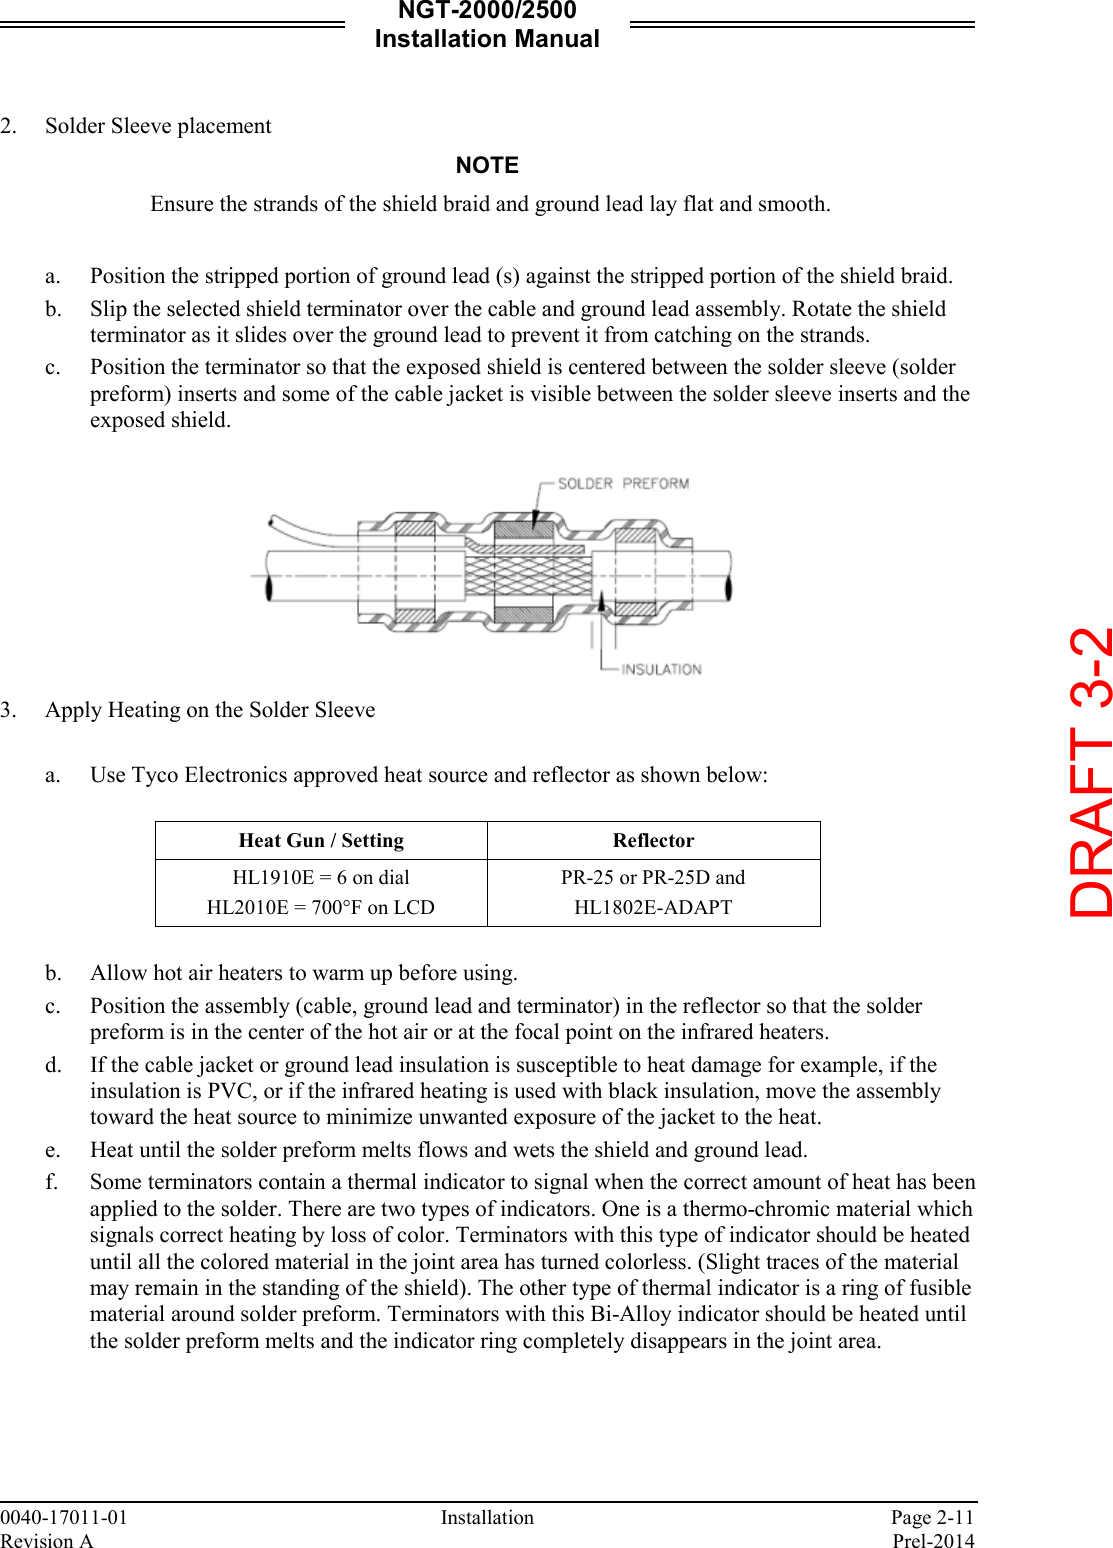 NGT-2000/2500 Installation Manual  0040-17011-01    Installation  Page 2-11 Revision A    Prel-2014  2. Solder Sleeve placement NOTE Ensure the strands of the shield braid and ground lead lay flat and smooth.  a. Position the stripped portion of ground lead (s) against the stripped portion of the shield braid. b. Slip the selected shield terminator over the cable and ground lead assembly. Rotate the shield terminator as it slides over the ground lead to prevent it from catching on the strands. c. Position the terminator so that the exposed shield is centered between the solder sleeve (solder preform) inserts and some of the cable jacket is visible between the solder sleeve inserts and the exposed shield.   3. Apply Heating on the Solder Sleeve  a. Use Tyco Electronics approved heat source and reflector as shown below:  Heat Gun / Setting Reflector HL1910E = 6 on dial HL2010E = 700°F on LCD PR-25 or PR-25D and HL1802E-ADAPT  b. Allow hot air heaters to warm up before using. c. Position the assembly (cable, ground lead and terminator) in the reflector so that the solder preform is in the center of the hot air or at the focal point on the infrared heaters. d. If the cable jacket or ground lead insulation is susceptible to heat damage for example, if the insulation is PVC, or if the infrared heating is used with black insulation, move the assembly toward the heat source to minimize unwanted exposure of the jacket to the heat. e. Heat until the solder preform melts flows and wets the shield and ground lead. f. Some terminators contain a thermal indicator to signal when the correct amount of heat has been applied to the solder. There are two types of indicators. One is a thermo-chromic material which signals correct heating by loss of color. Terminators with this type of indicator should be heated until all the colored material in the joint area has turned colorless. (Slight traces of the material may remain in the standing of the shield). The other type of thermal indicator is a ring of fusible material around solder preform. Terminators with this Bi-Alloy indicator should be heated until the solder preform melts and the indicator ring completely disappears in the joint area.    DRAFT 3-2